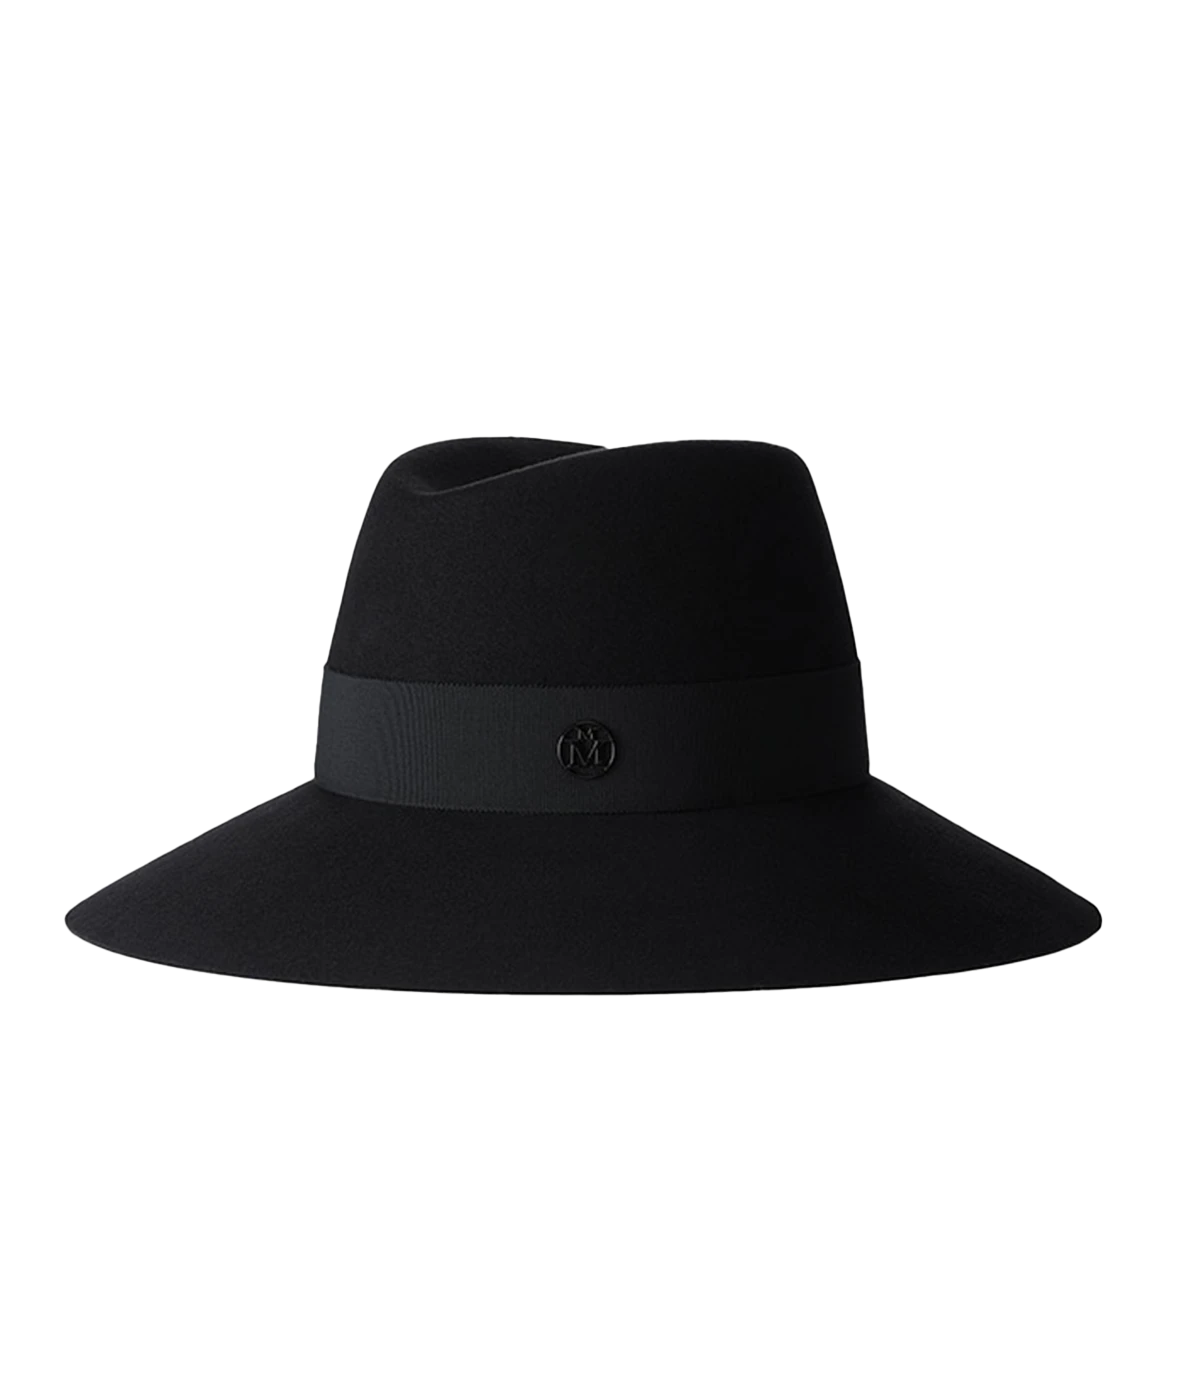 Wool felt waterproof black fedora hat. Timeless and elegant accessory to add style to any look. 